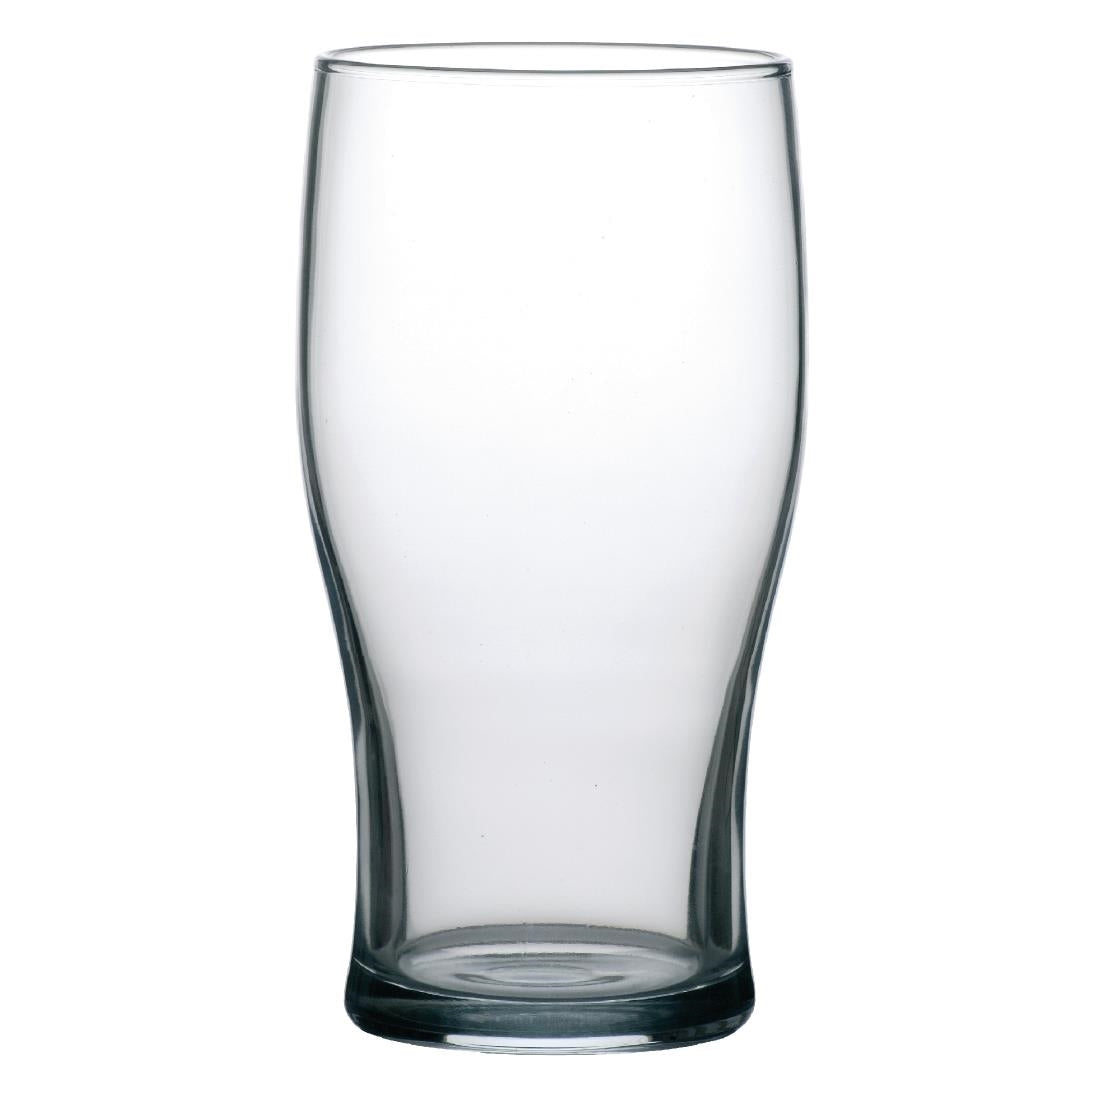 FU233 Arcoroc Tulip Nucleated Beer Glasses 570ml CE Marked (Pack of 24) JD Catering Equipment Solutions Ltd